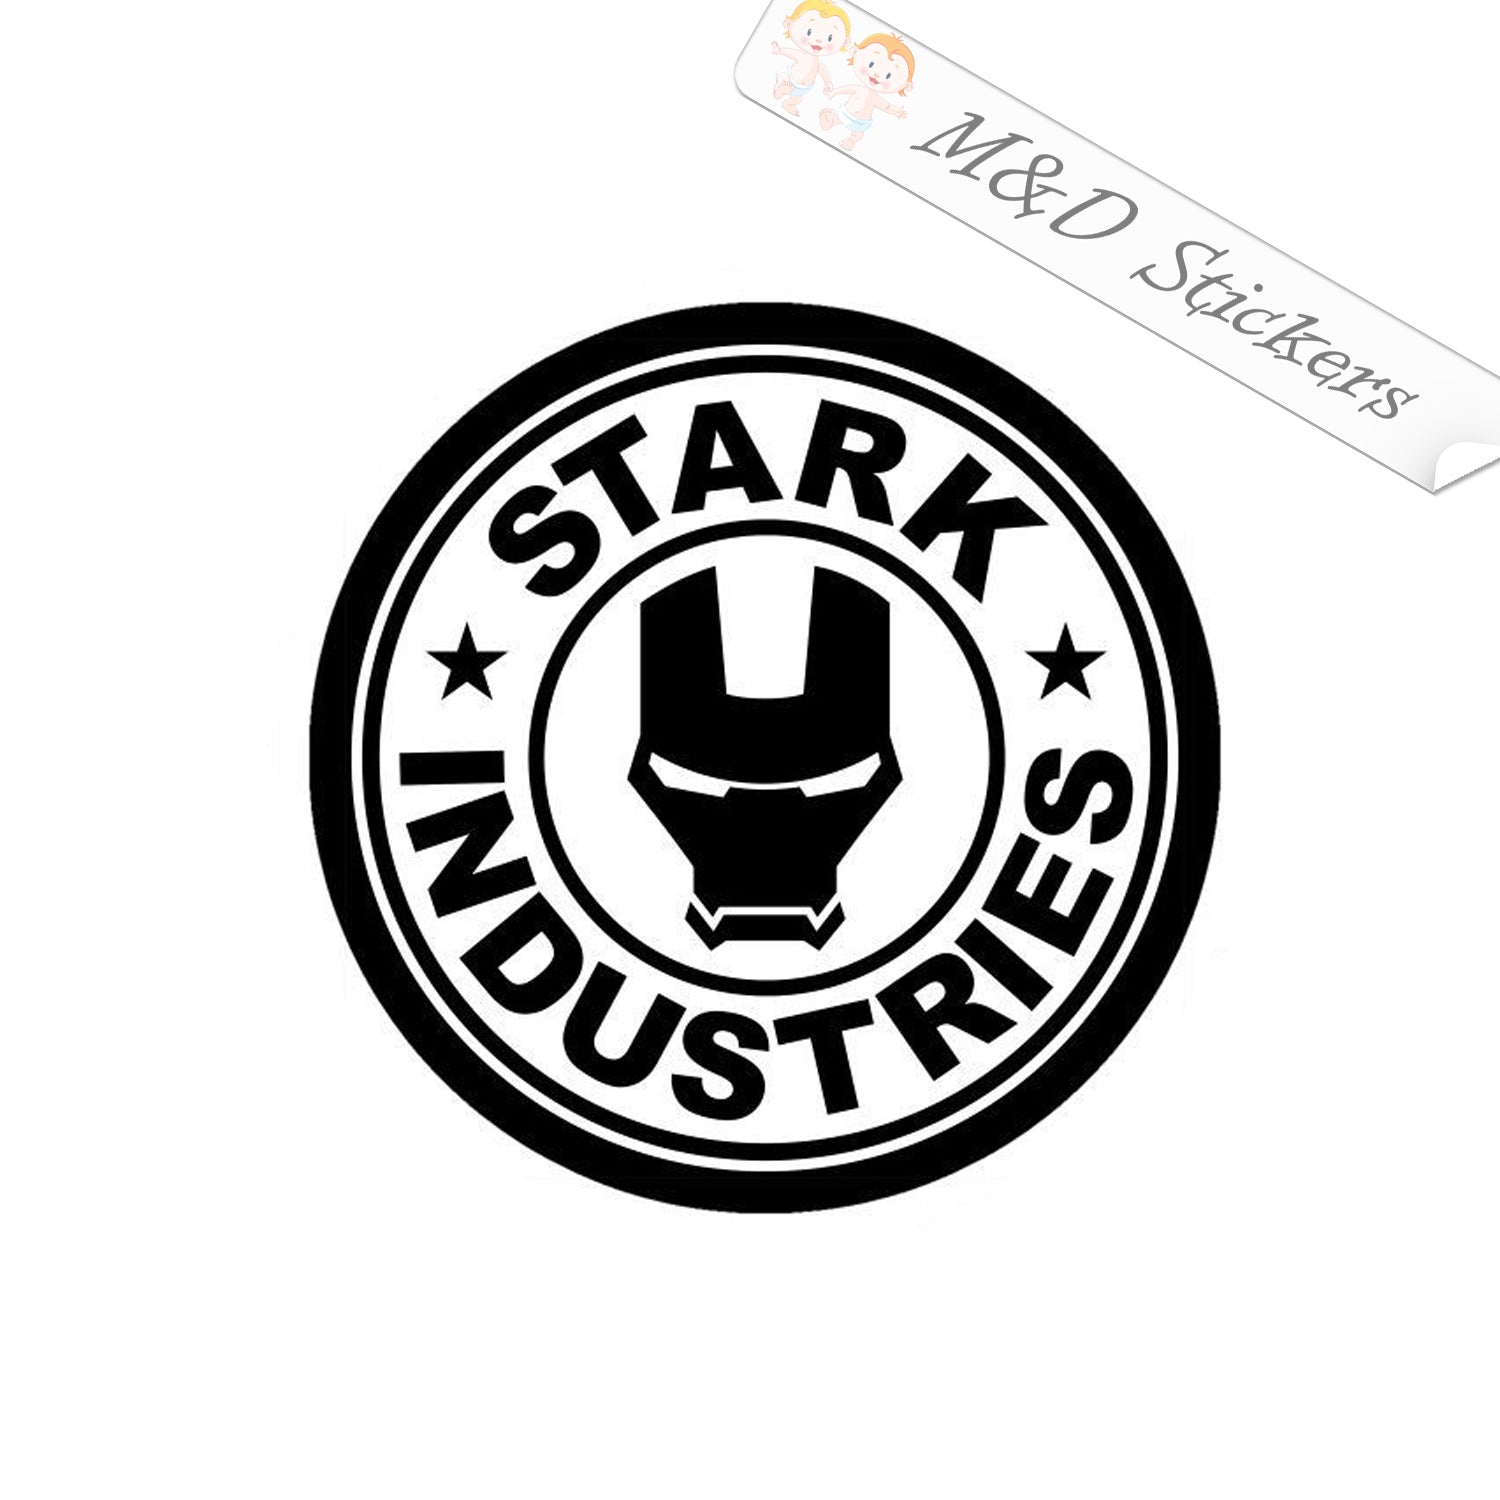 2x Stark industries Vinyl Decal Sticker Different colors & size